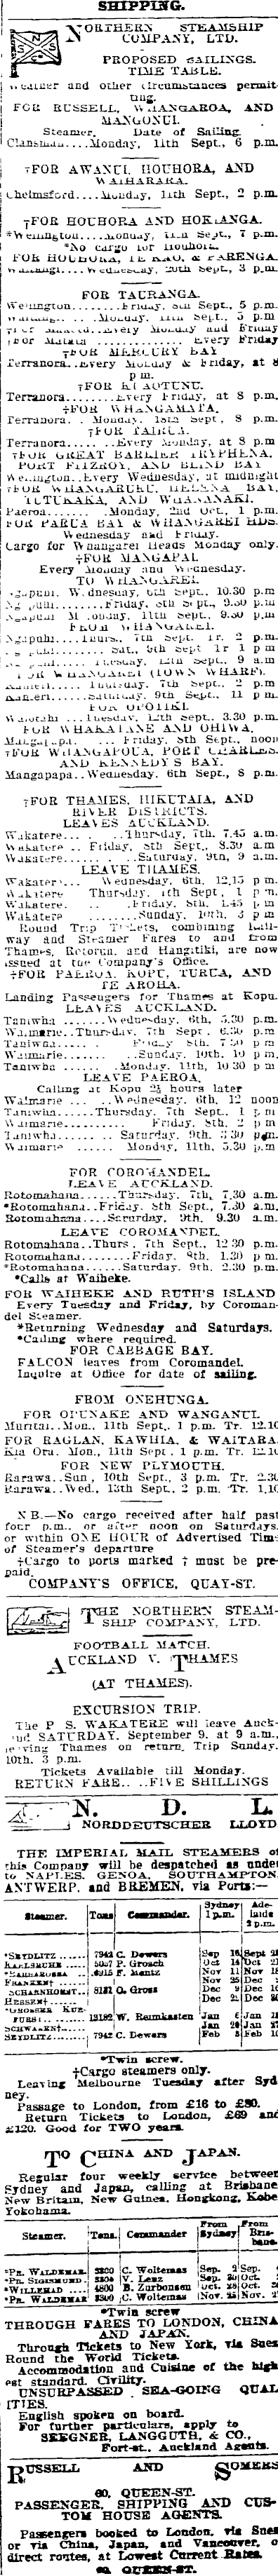 Papers Past Newspapers Auckland Star 6 September 1905 Page 1 Advertisements Column 2